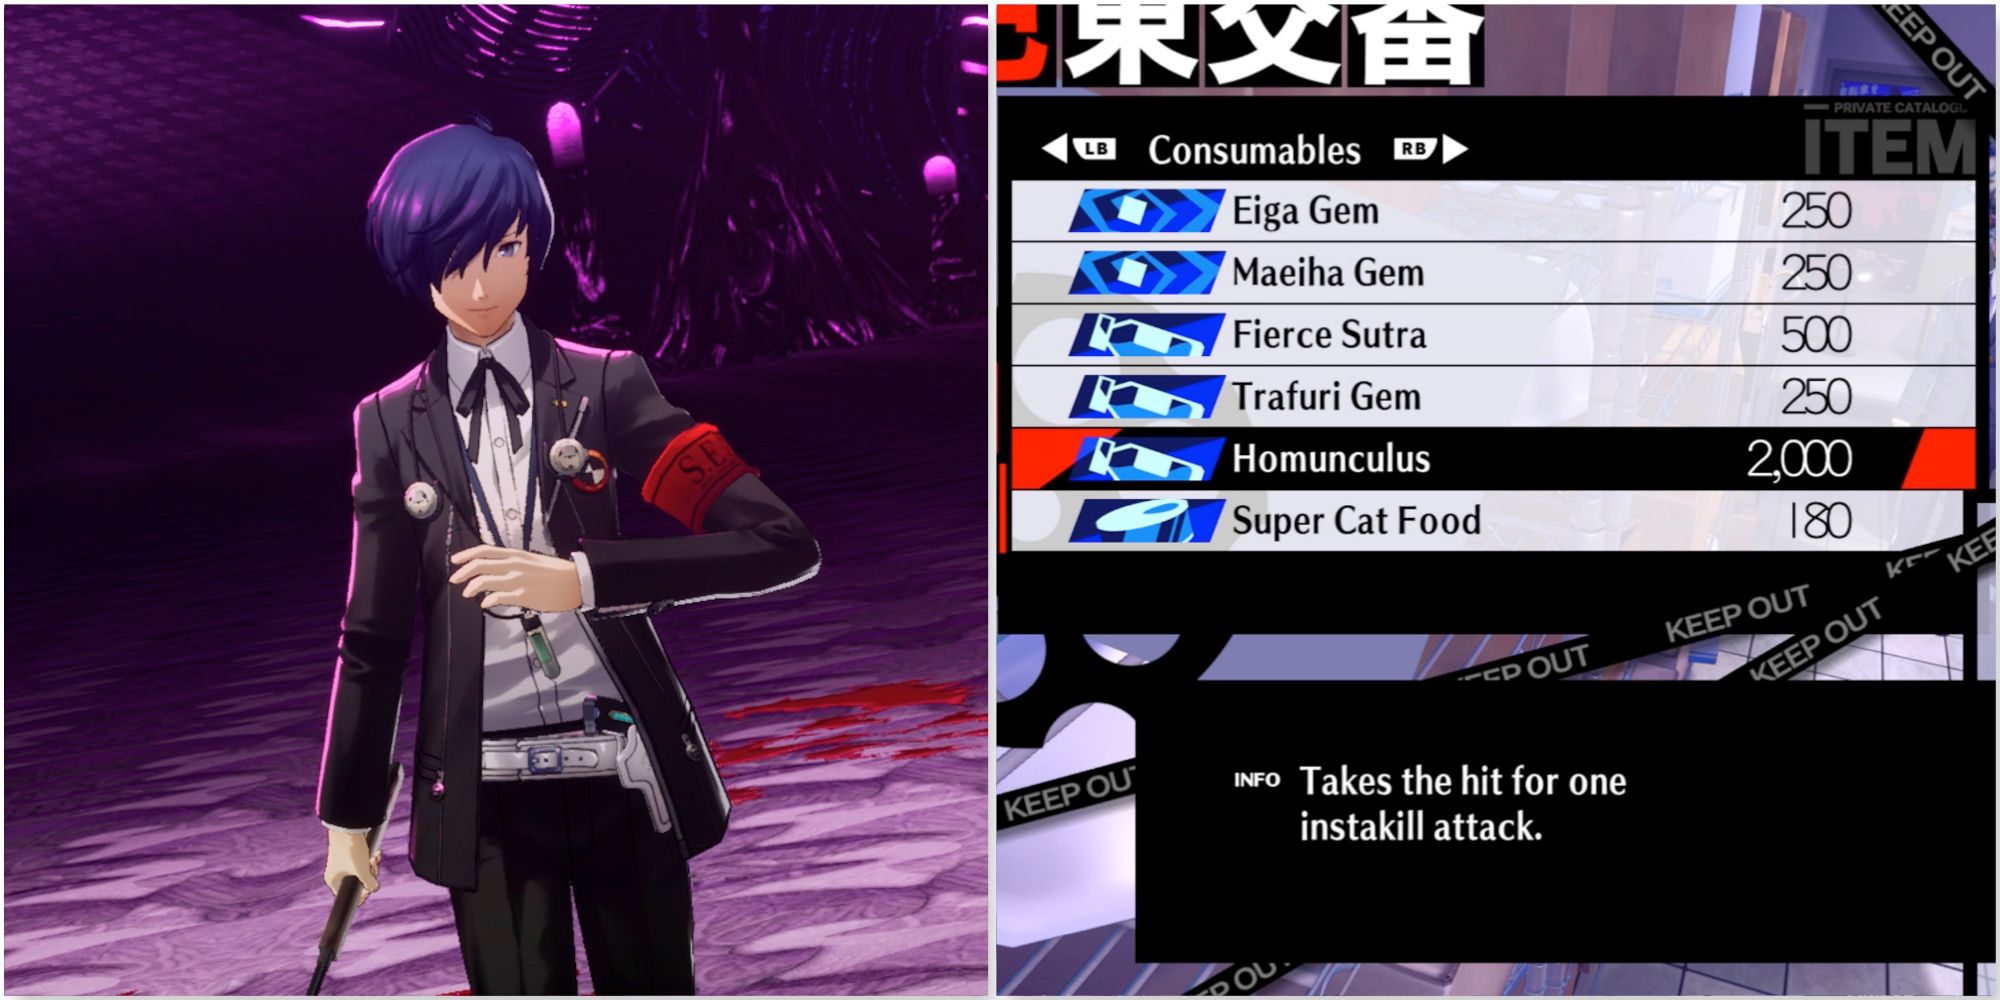 Makoto and the Homunculus item in Persona 3 Reload